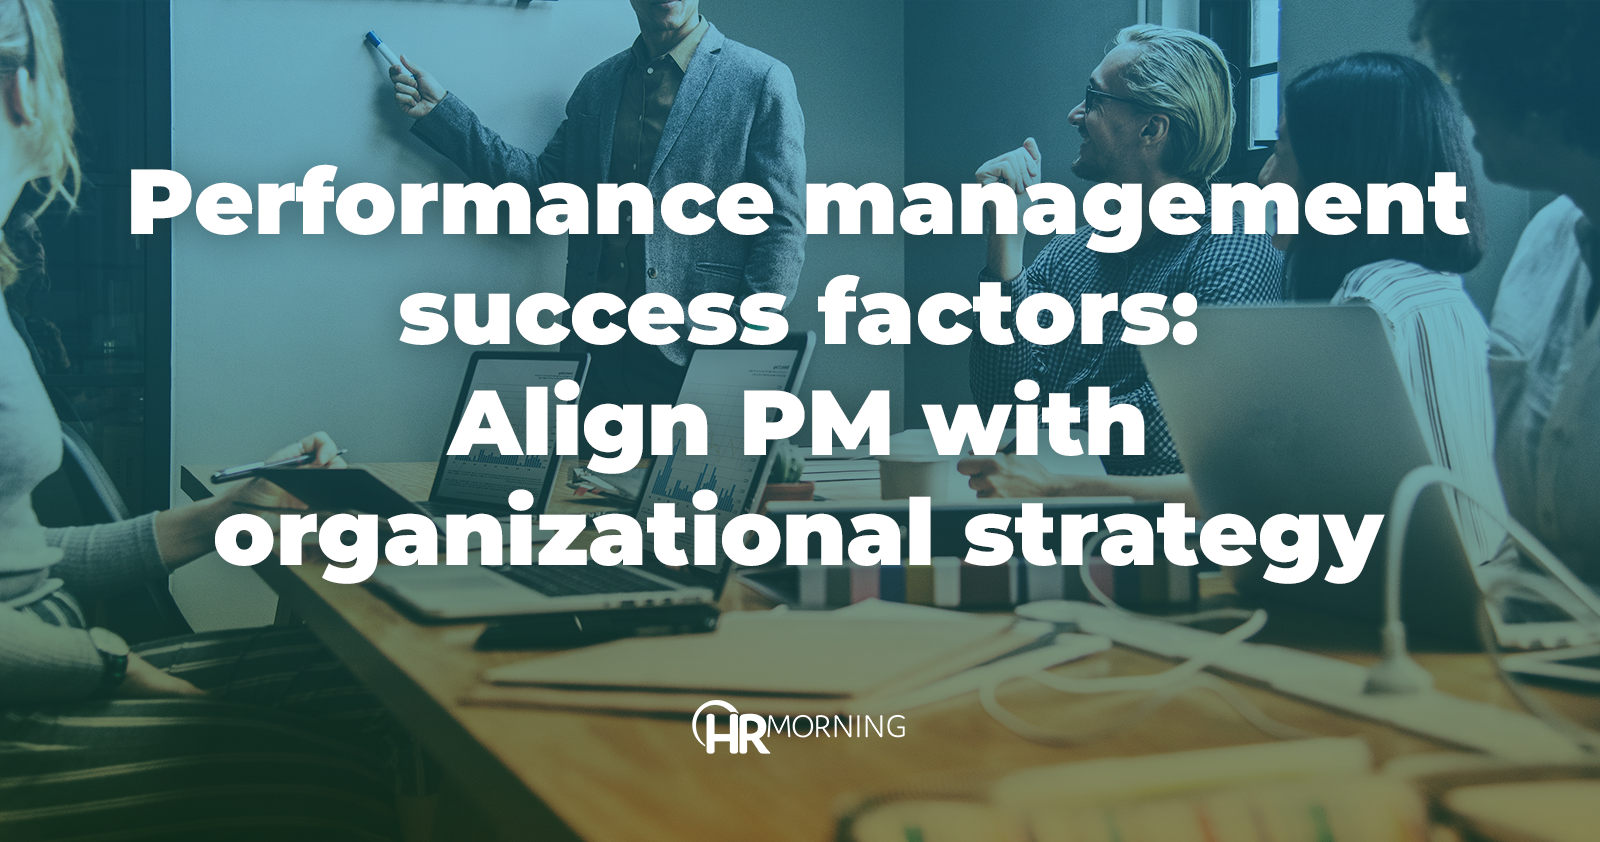 Performance management success factors: Align PM with organizational strategy